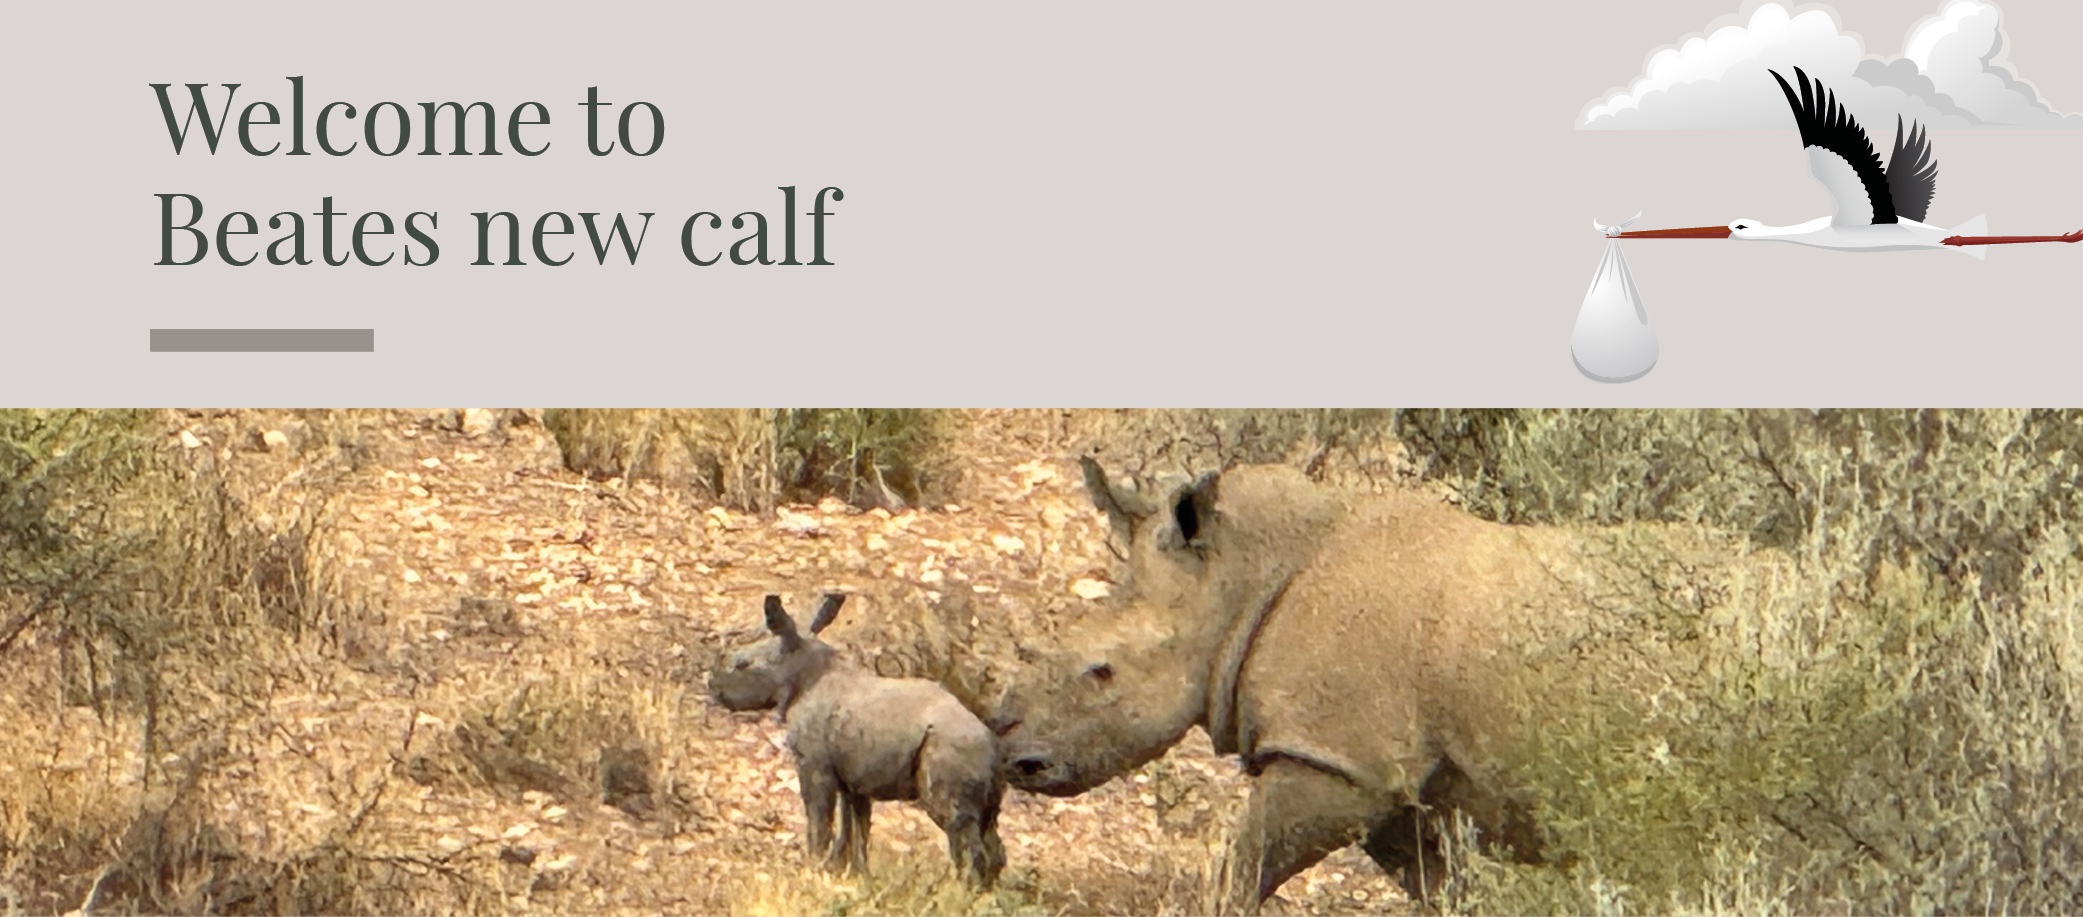 Welcome to Beate's new calf here at the rhino sanctuary in Namibia.